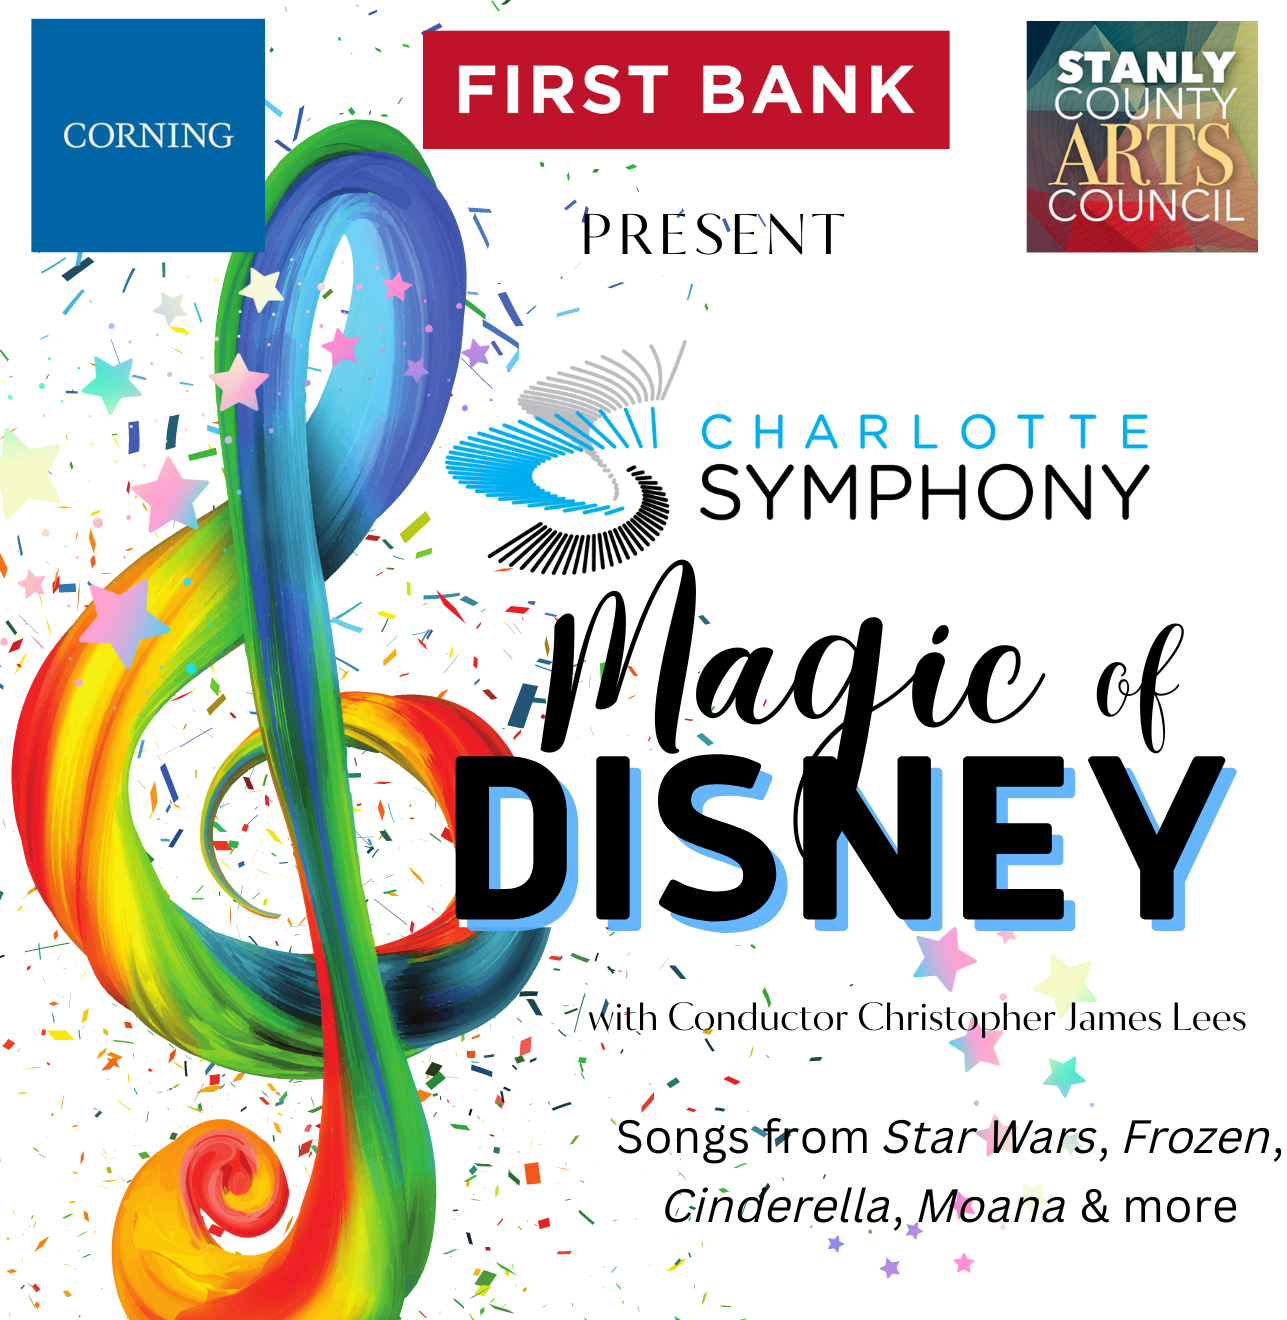 First Bank, Corning & SCAC present “Magic of Disney” with the Charlotte Symphony